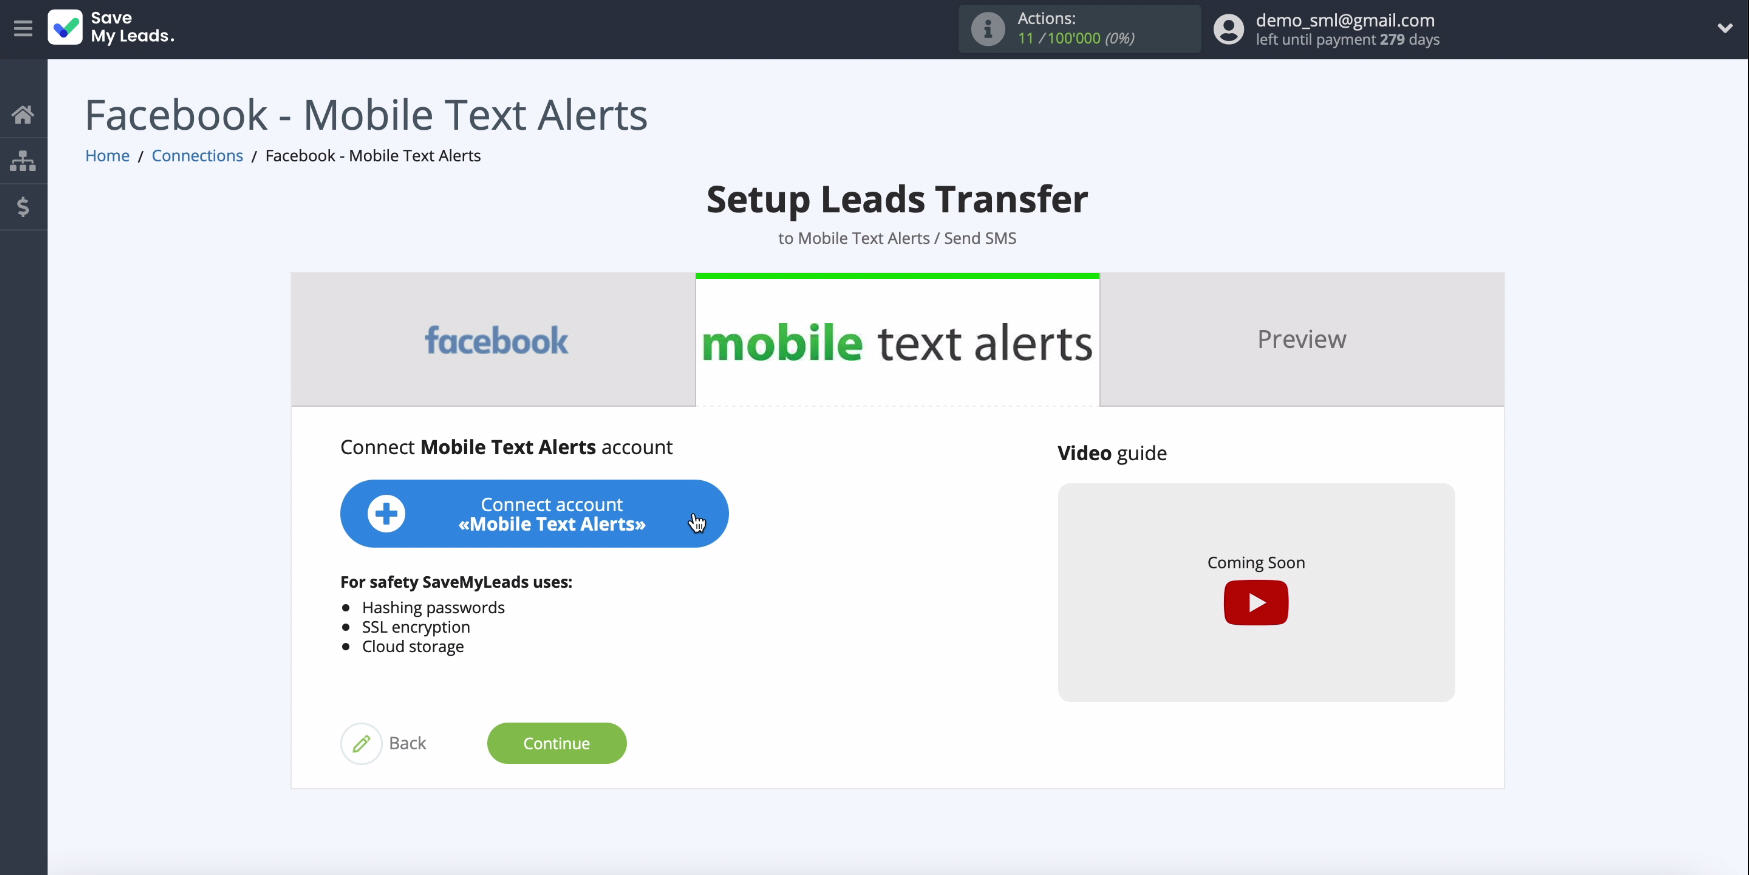 Facebook and Mobile Text Alerts integration | Connect your Mobile Text Alerts account